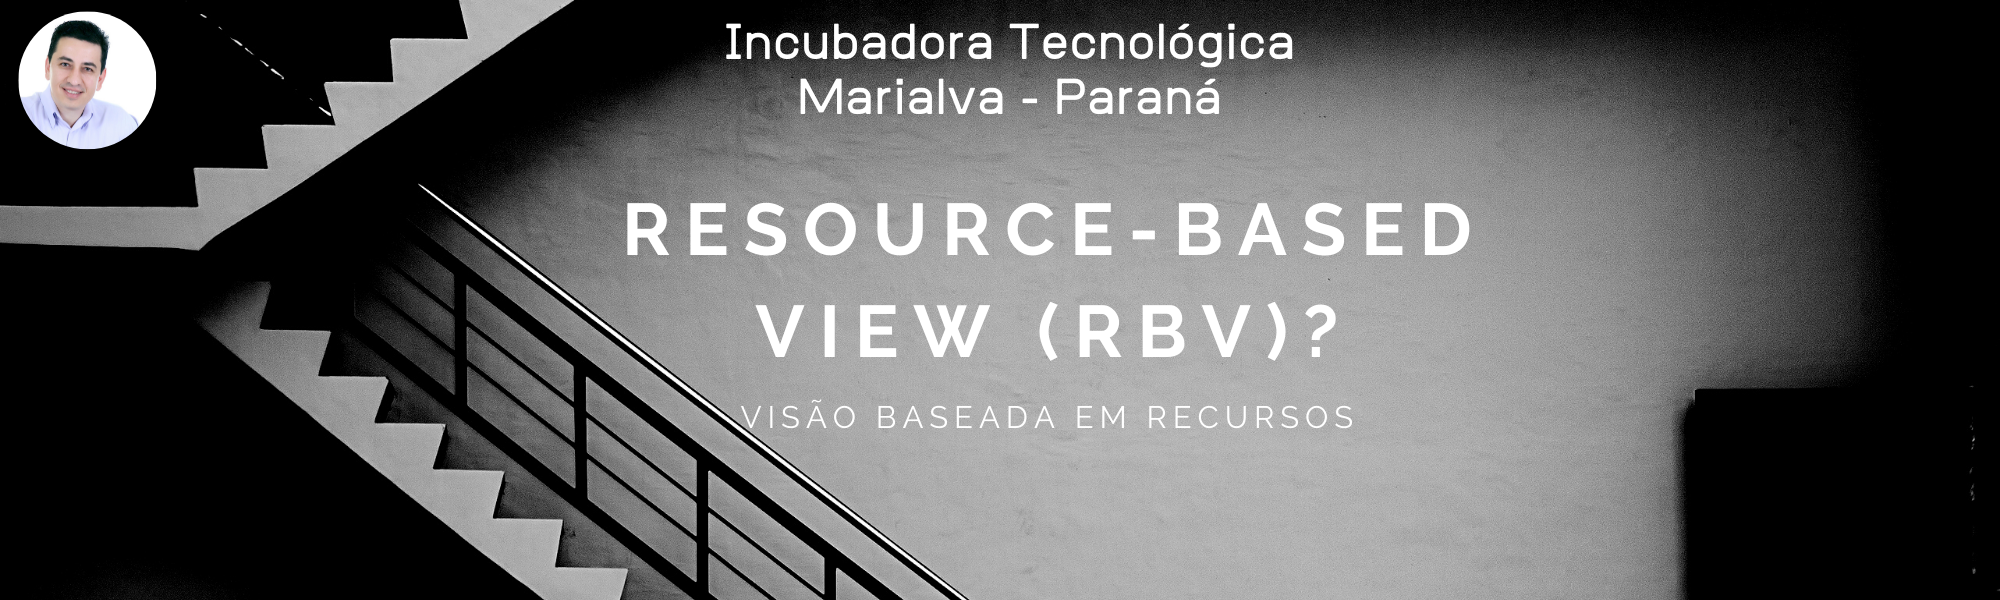 RESOURCE BASED VIEW RBV